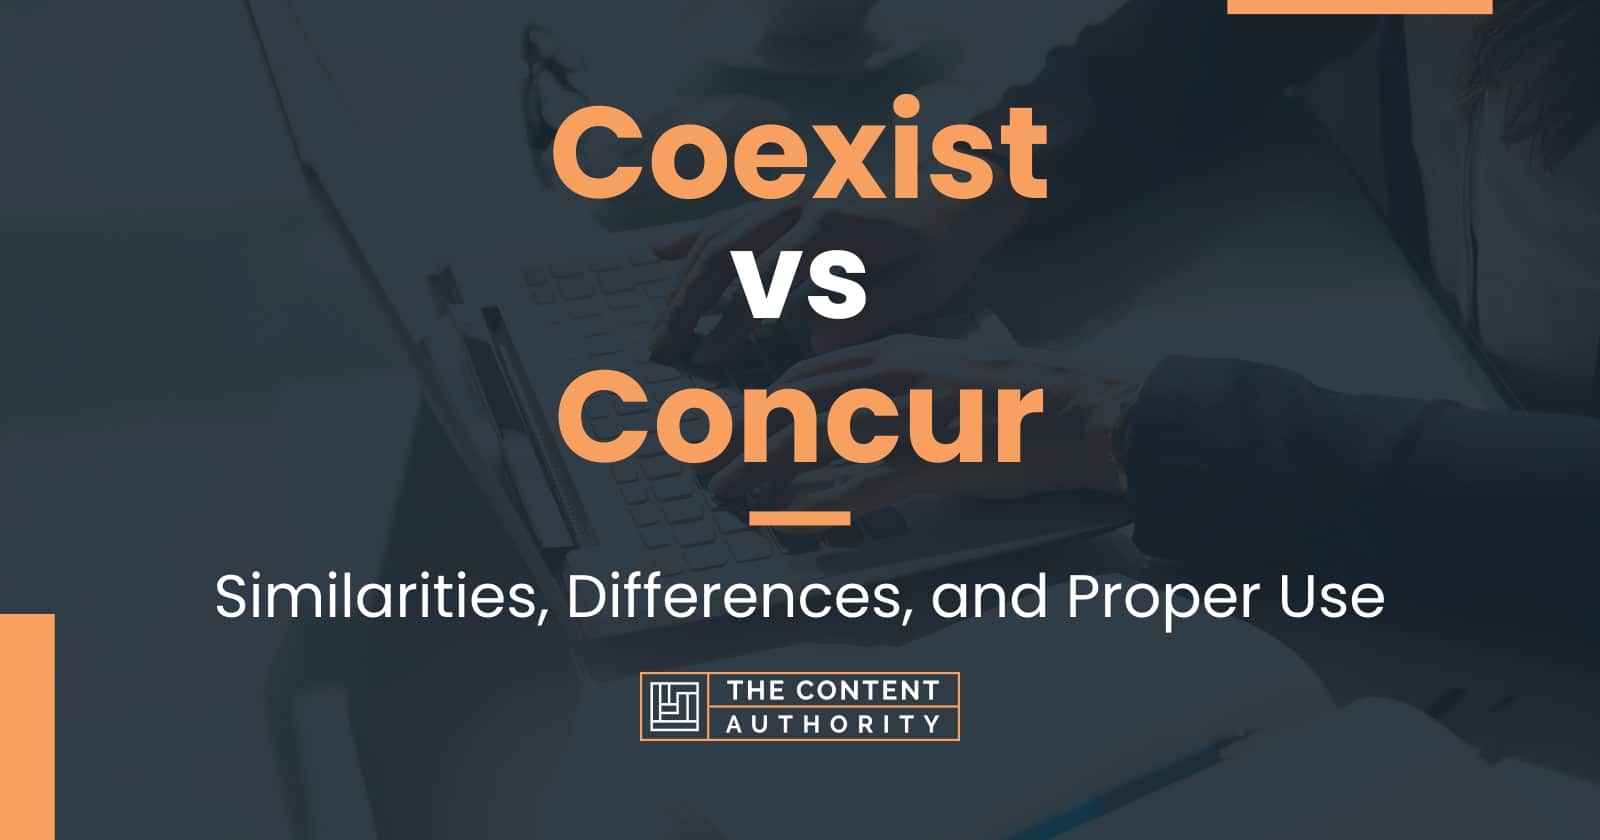 Coexist vs Concur: Similarities, Differences, and Proper Use